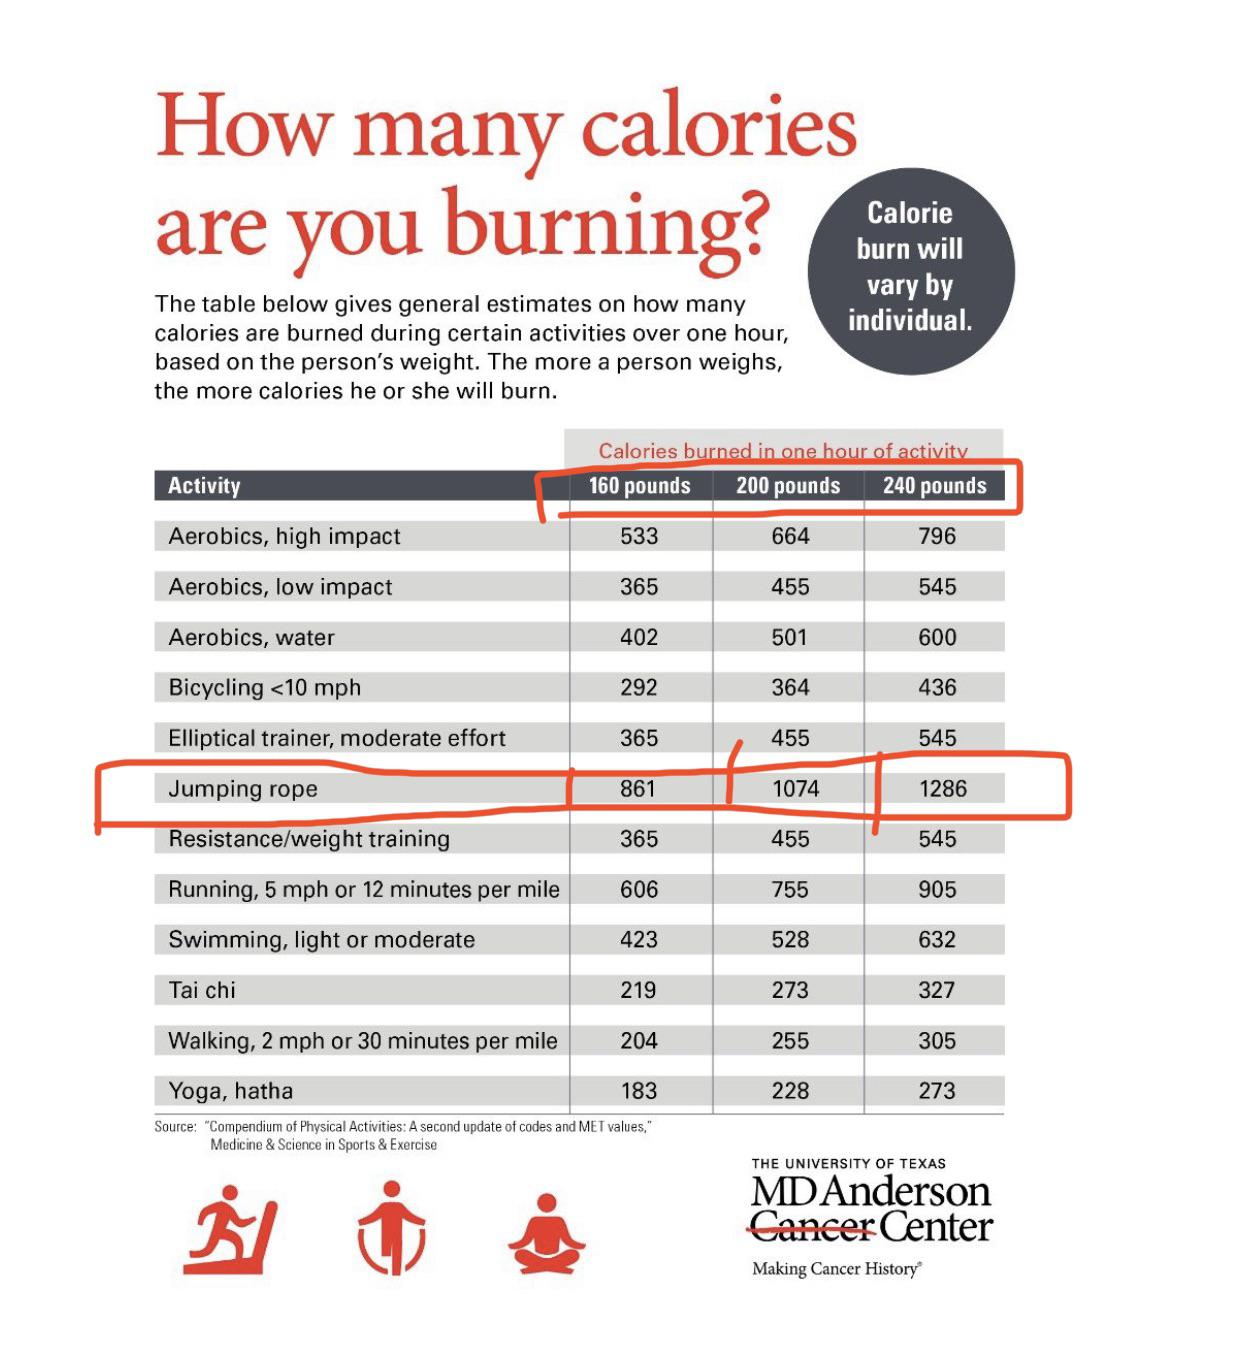 how many calories do i burn by jumping rope